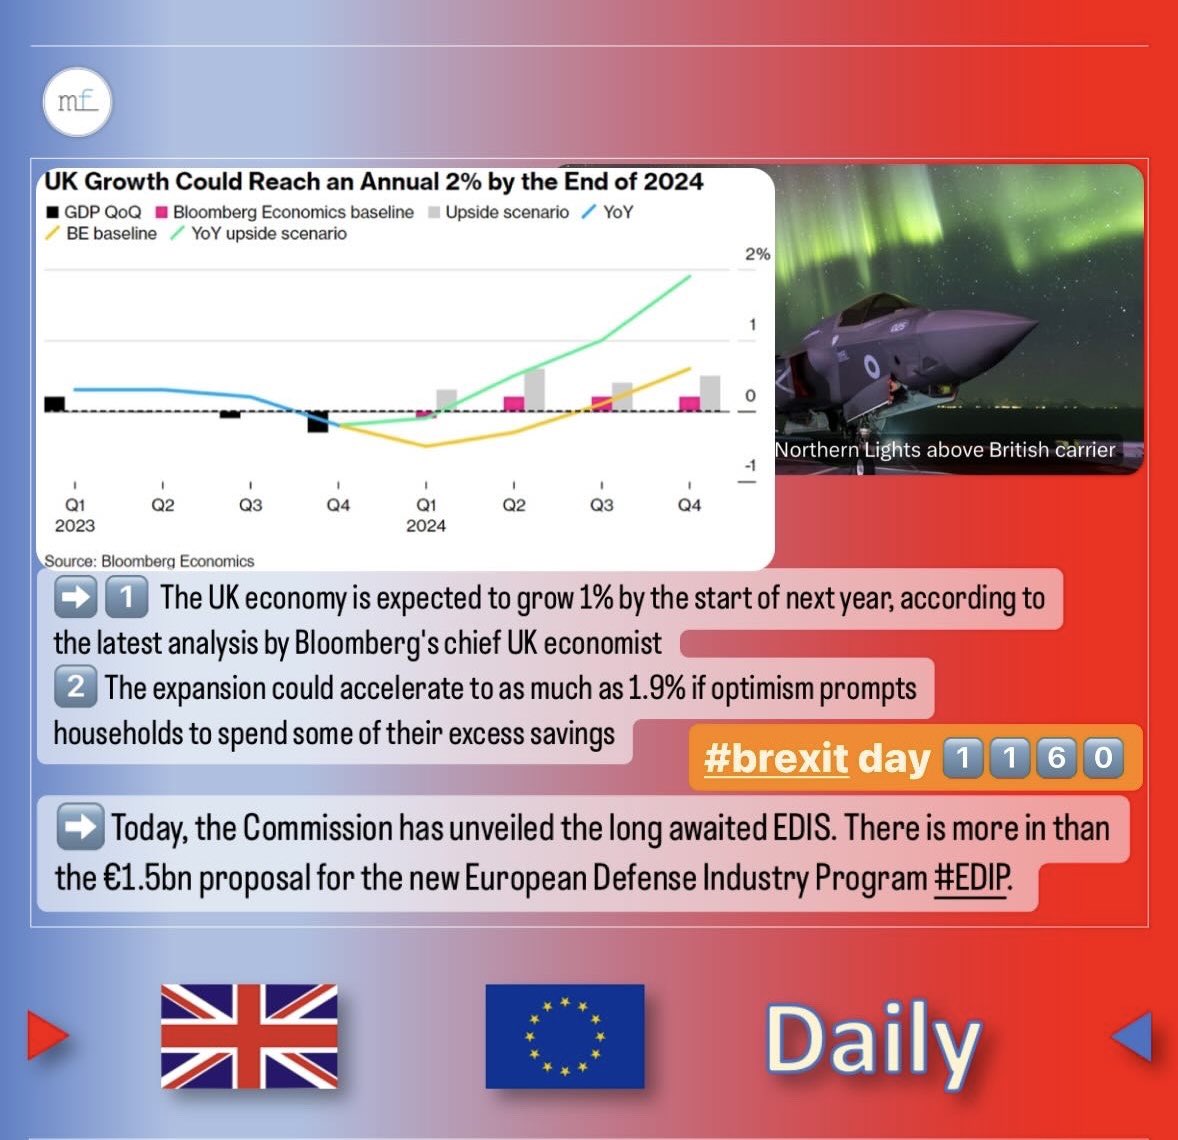 #Brexit daily #BrexitNews day 1️⃣1️⃣6️⃣0️⃣ #energytransition #trade #supplychain #business #logistics #defence #trade #export #import #customs #Finance #motionfinity #finances #financialservices #research #Science #space